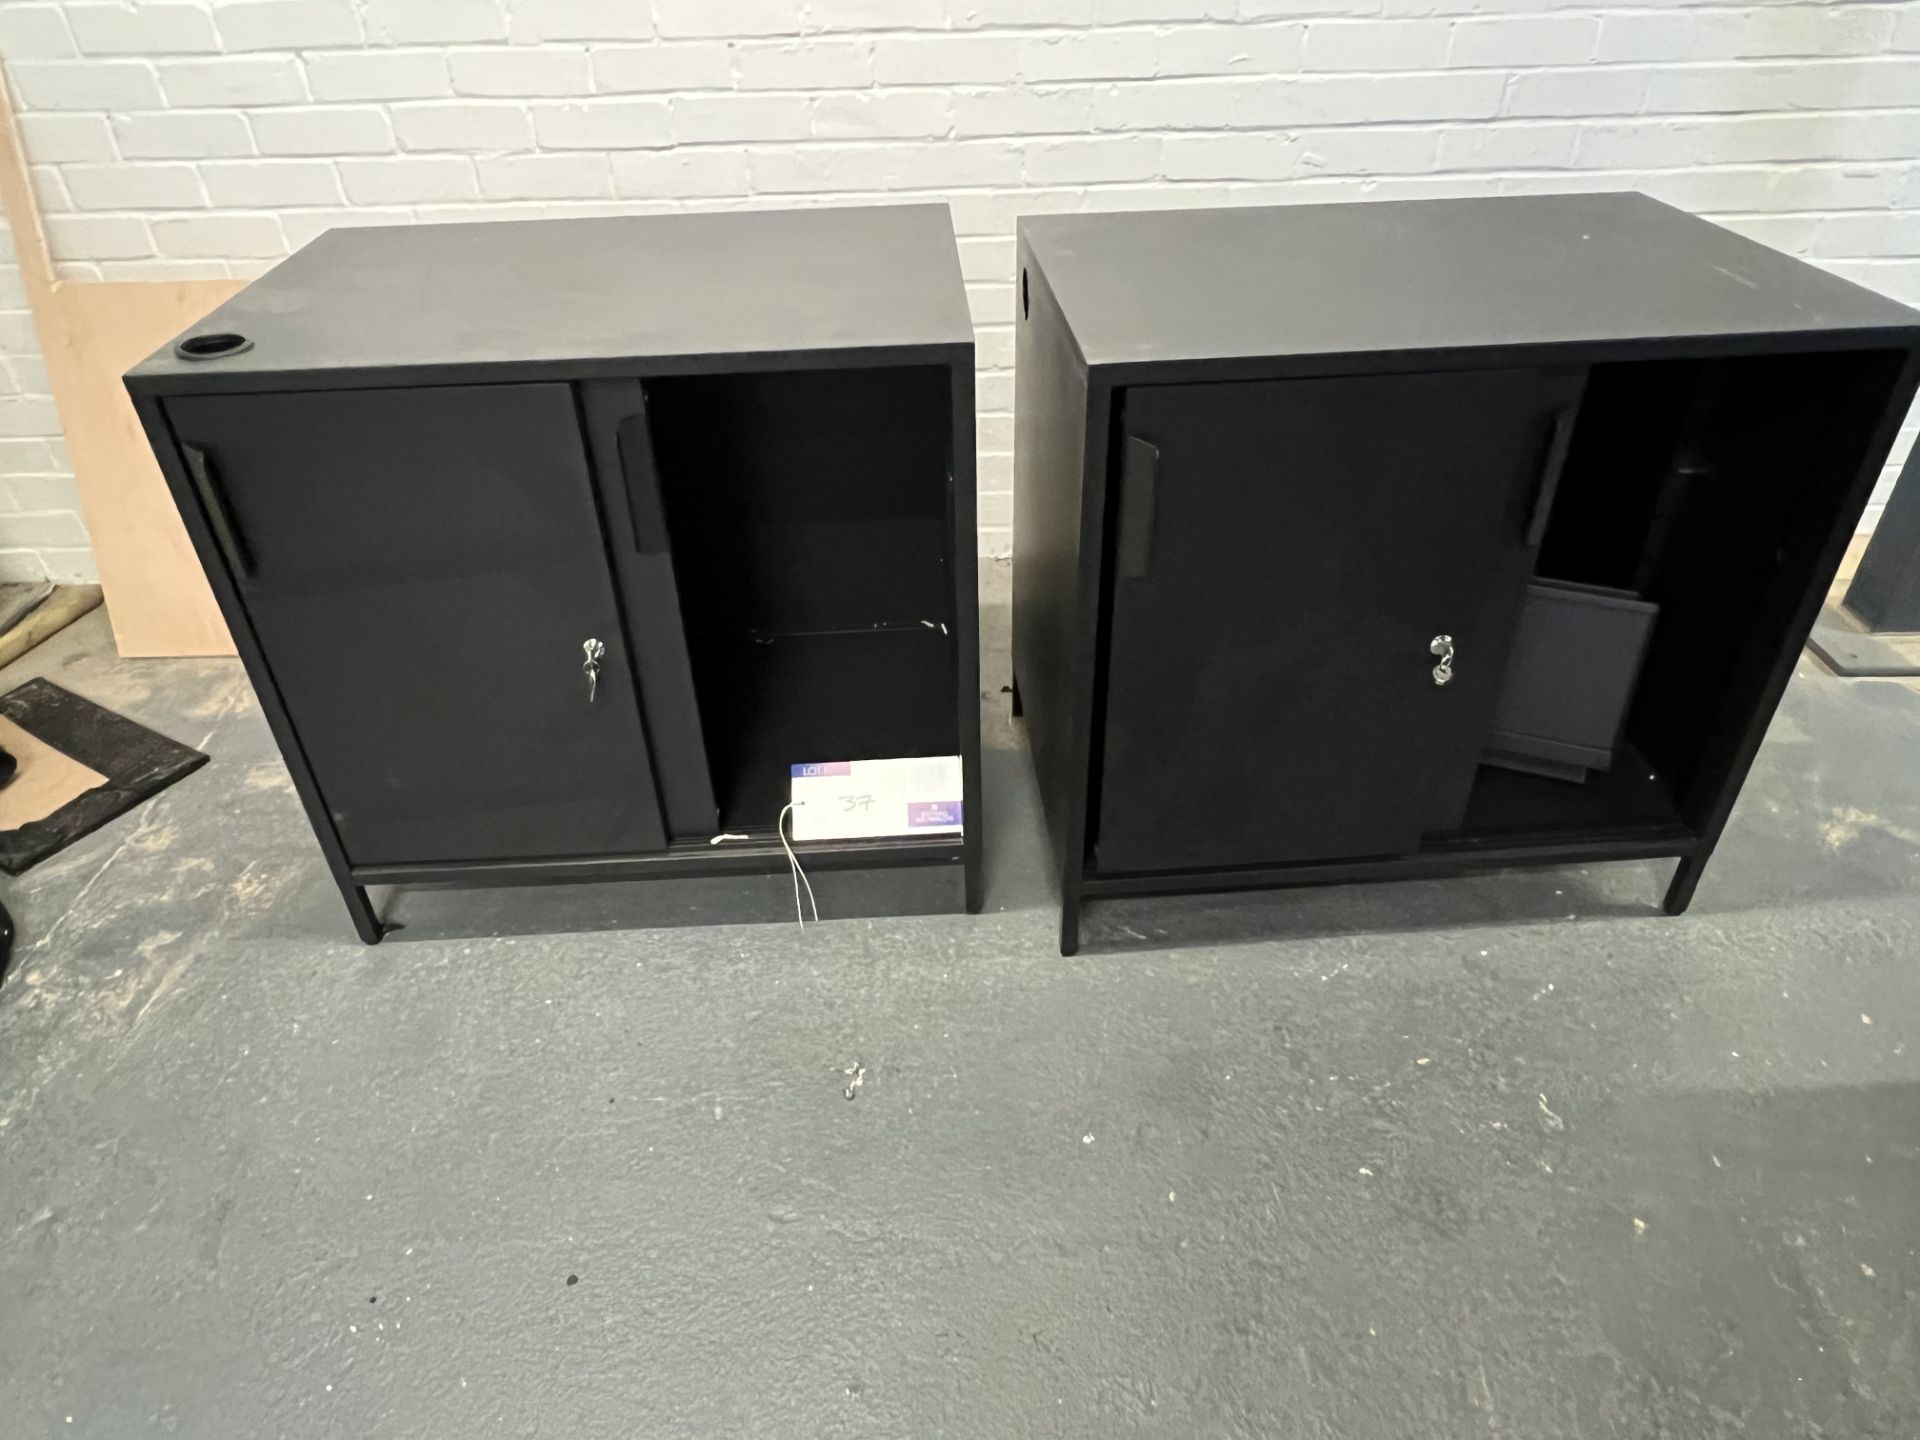 2 Black Cabinets (located at Visions, Unit 14, Suttons Business Park, Reading, Berkshire, RG6 1AZ).